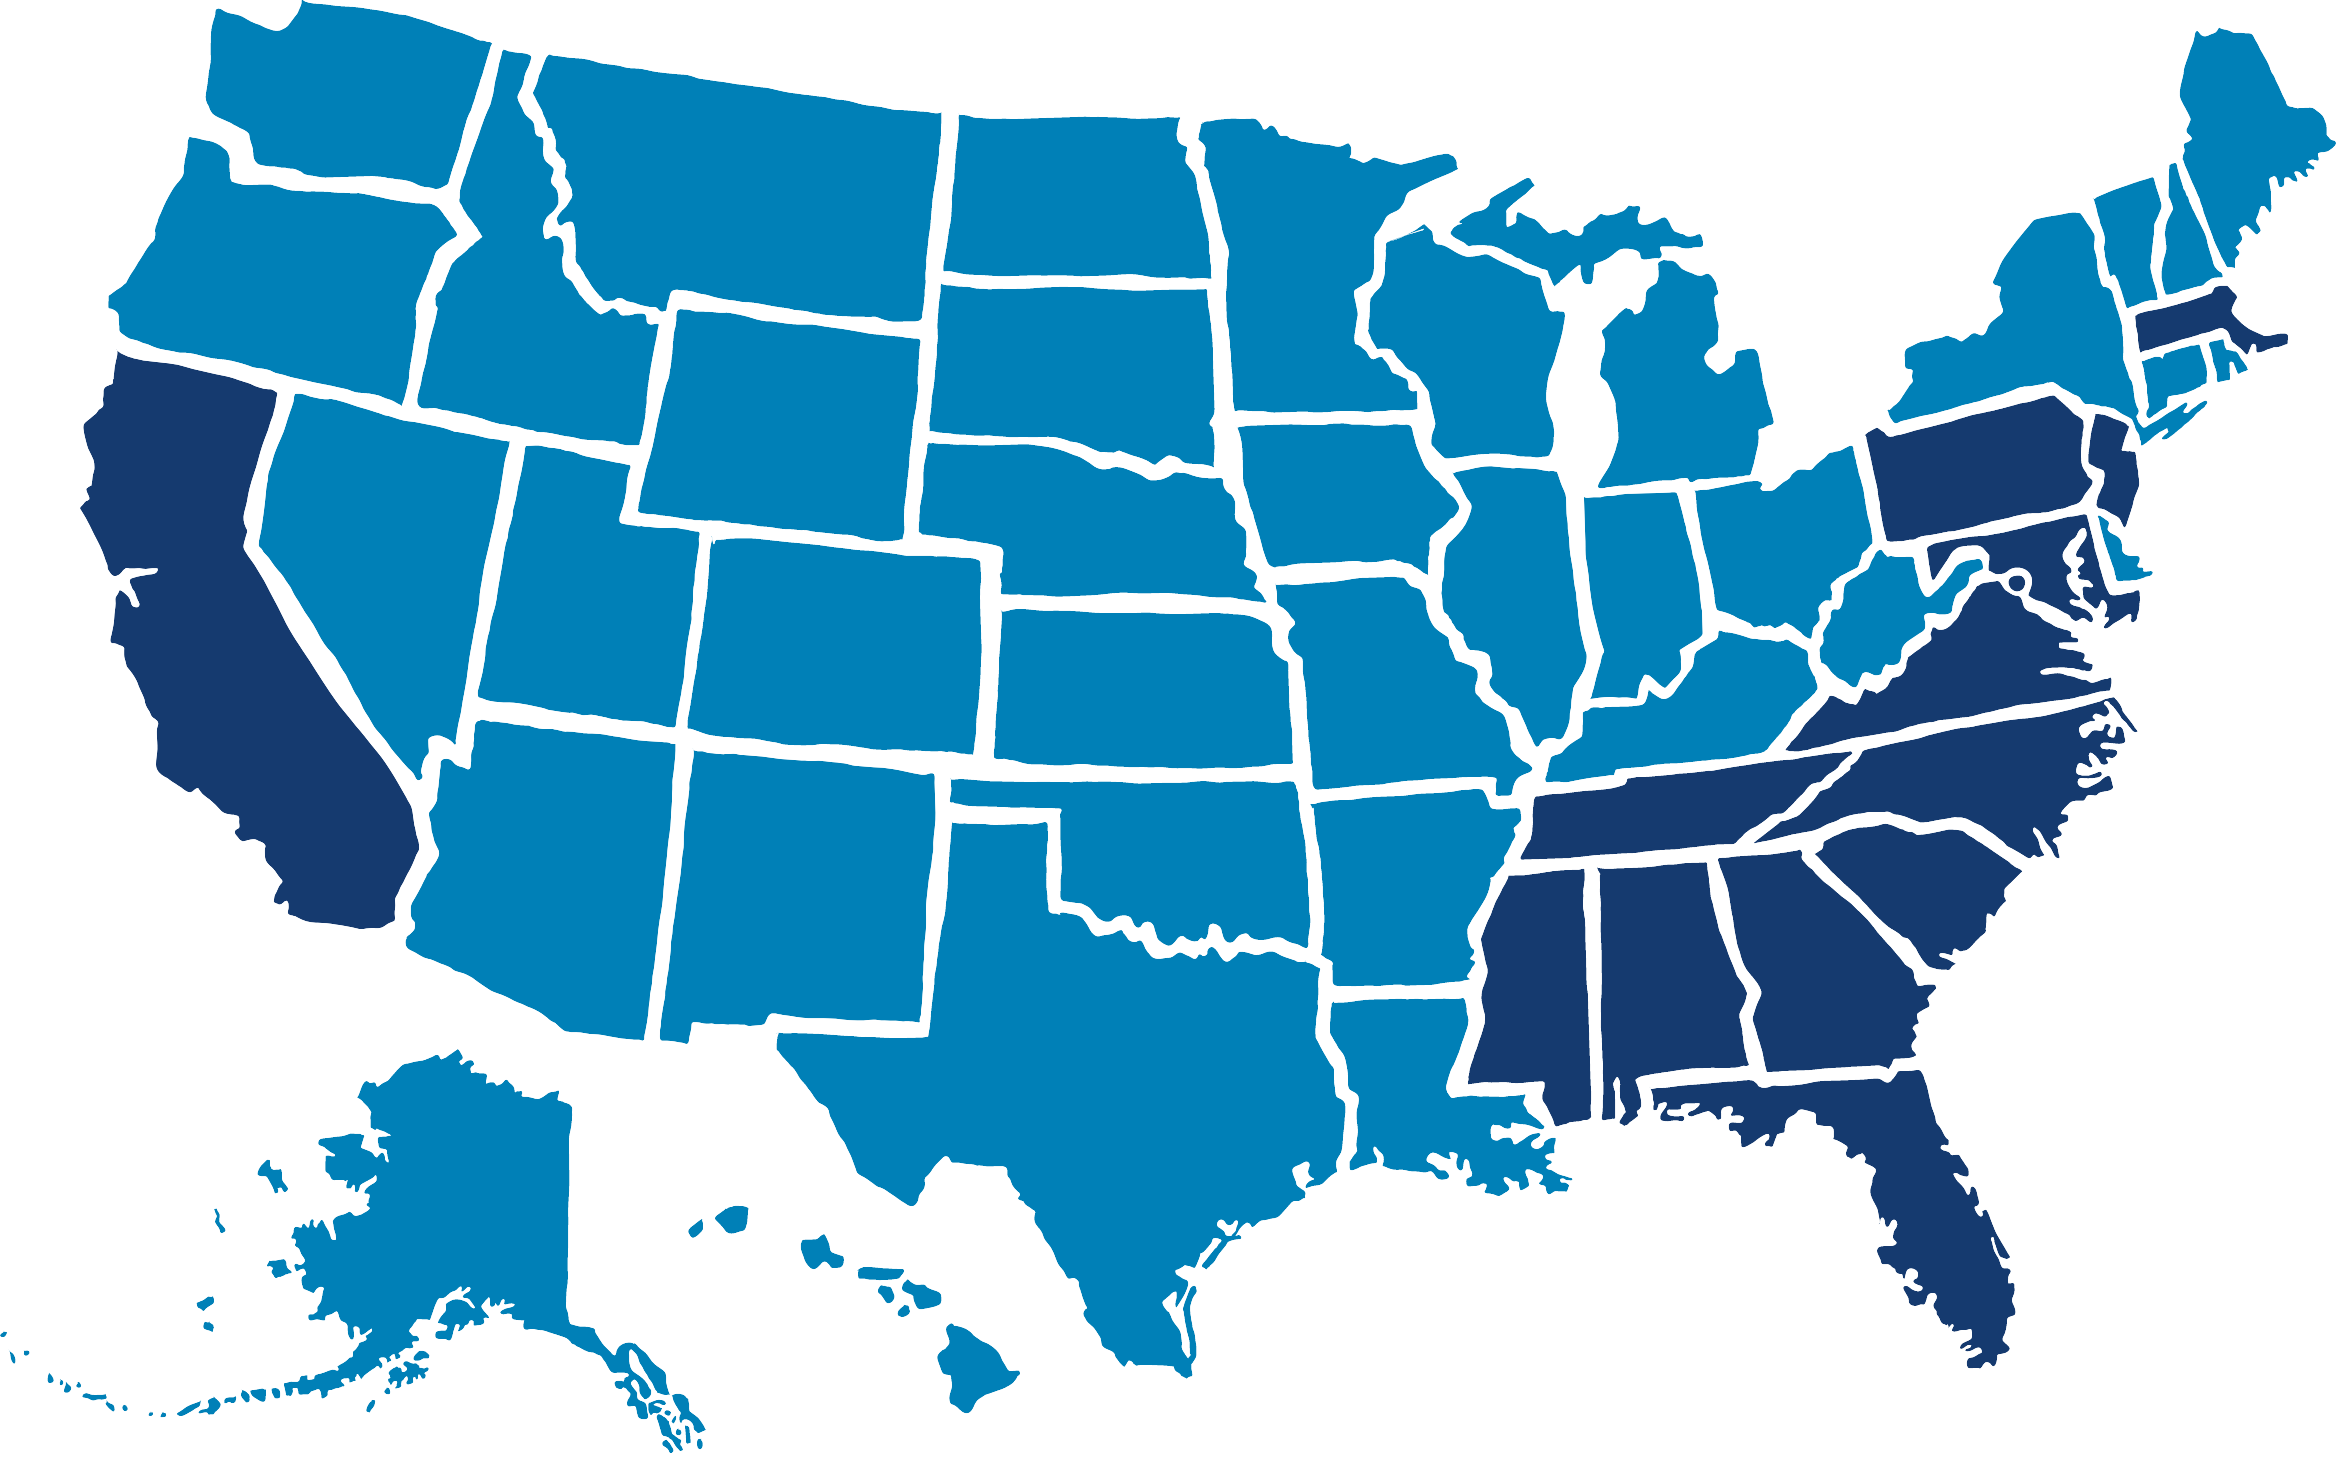 A map of the United States is shown with two different colors. One for California and the Southeast United States, and one for the rest of the states